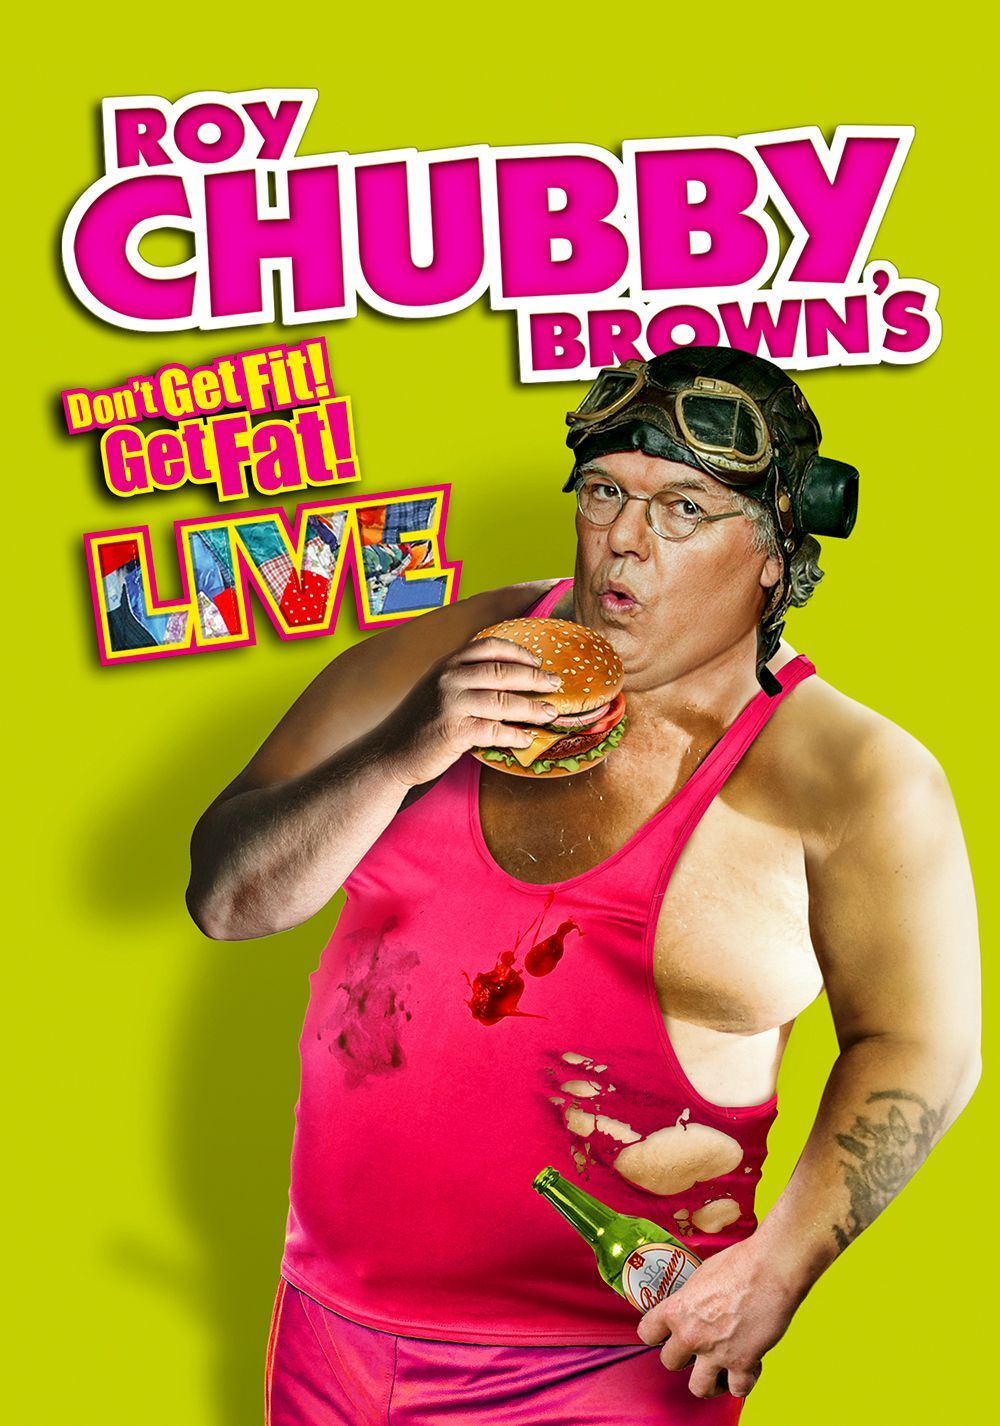 Sunshine recommend best of chubby movie Chubby